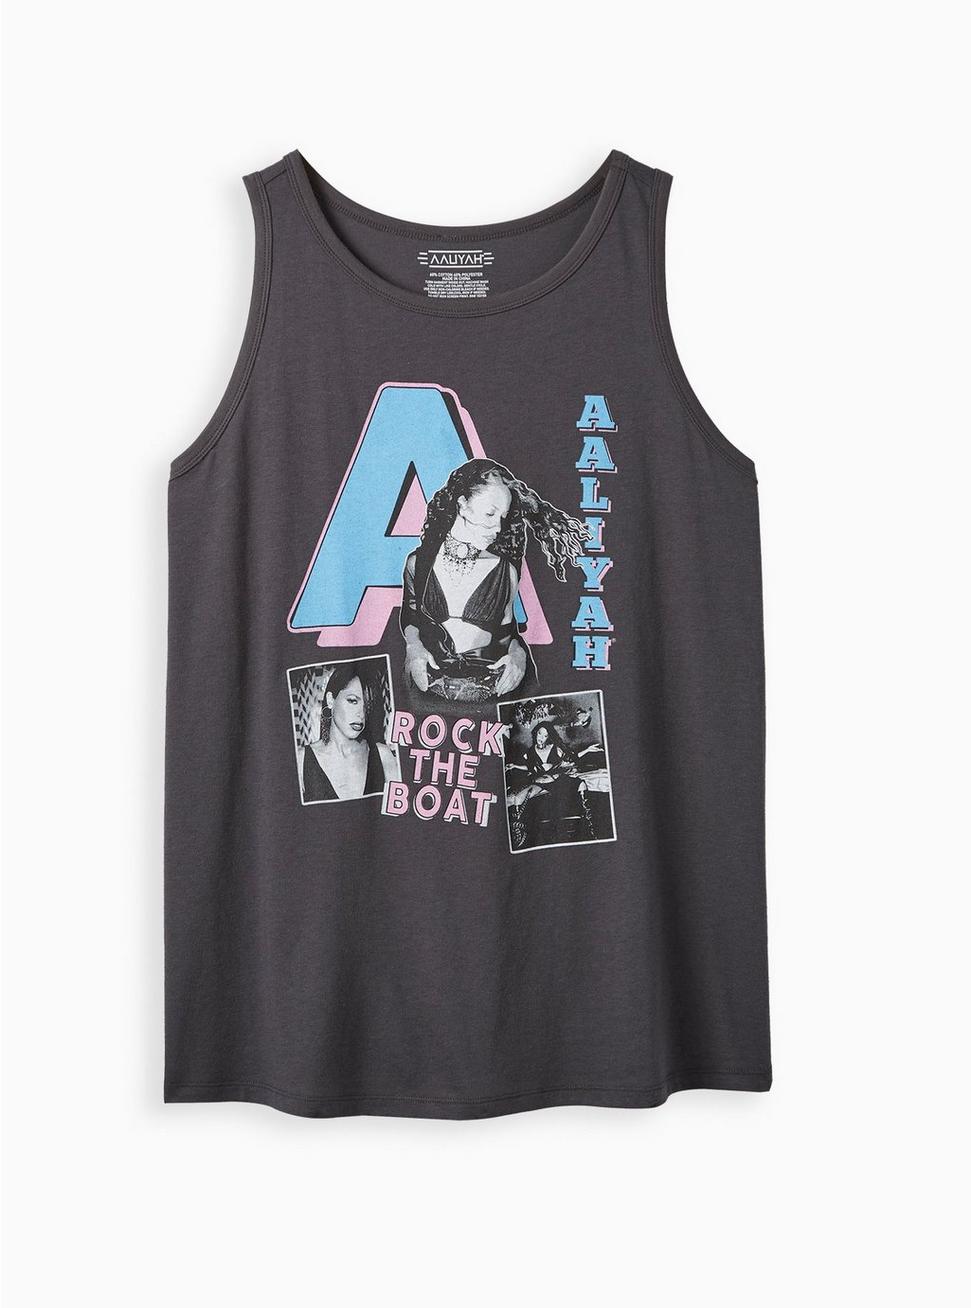 Plus Size Aaliyah Classic Fit Crew Tank - Cotton Boat Grey, NINE IRON, hi-res